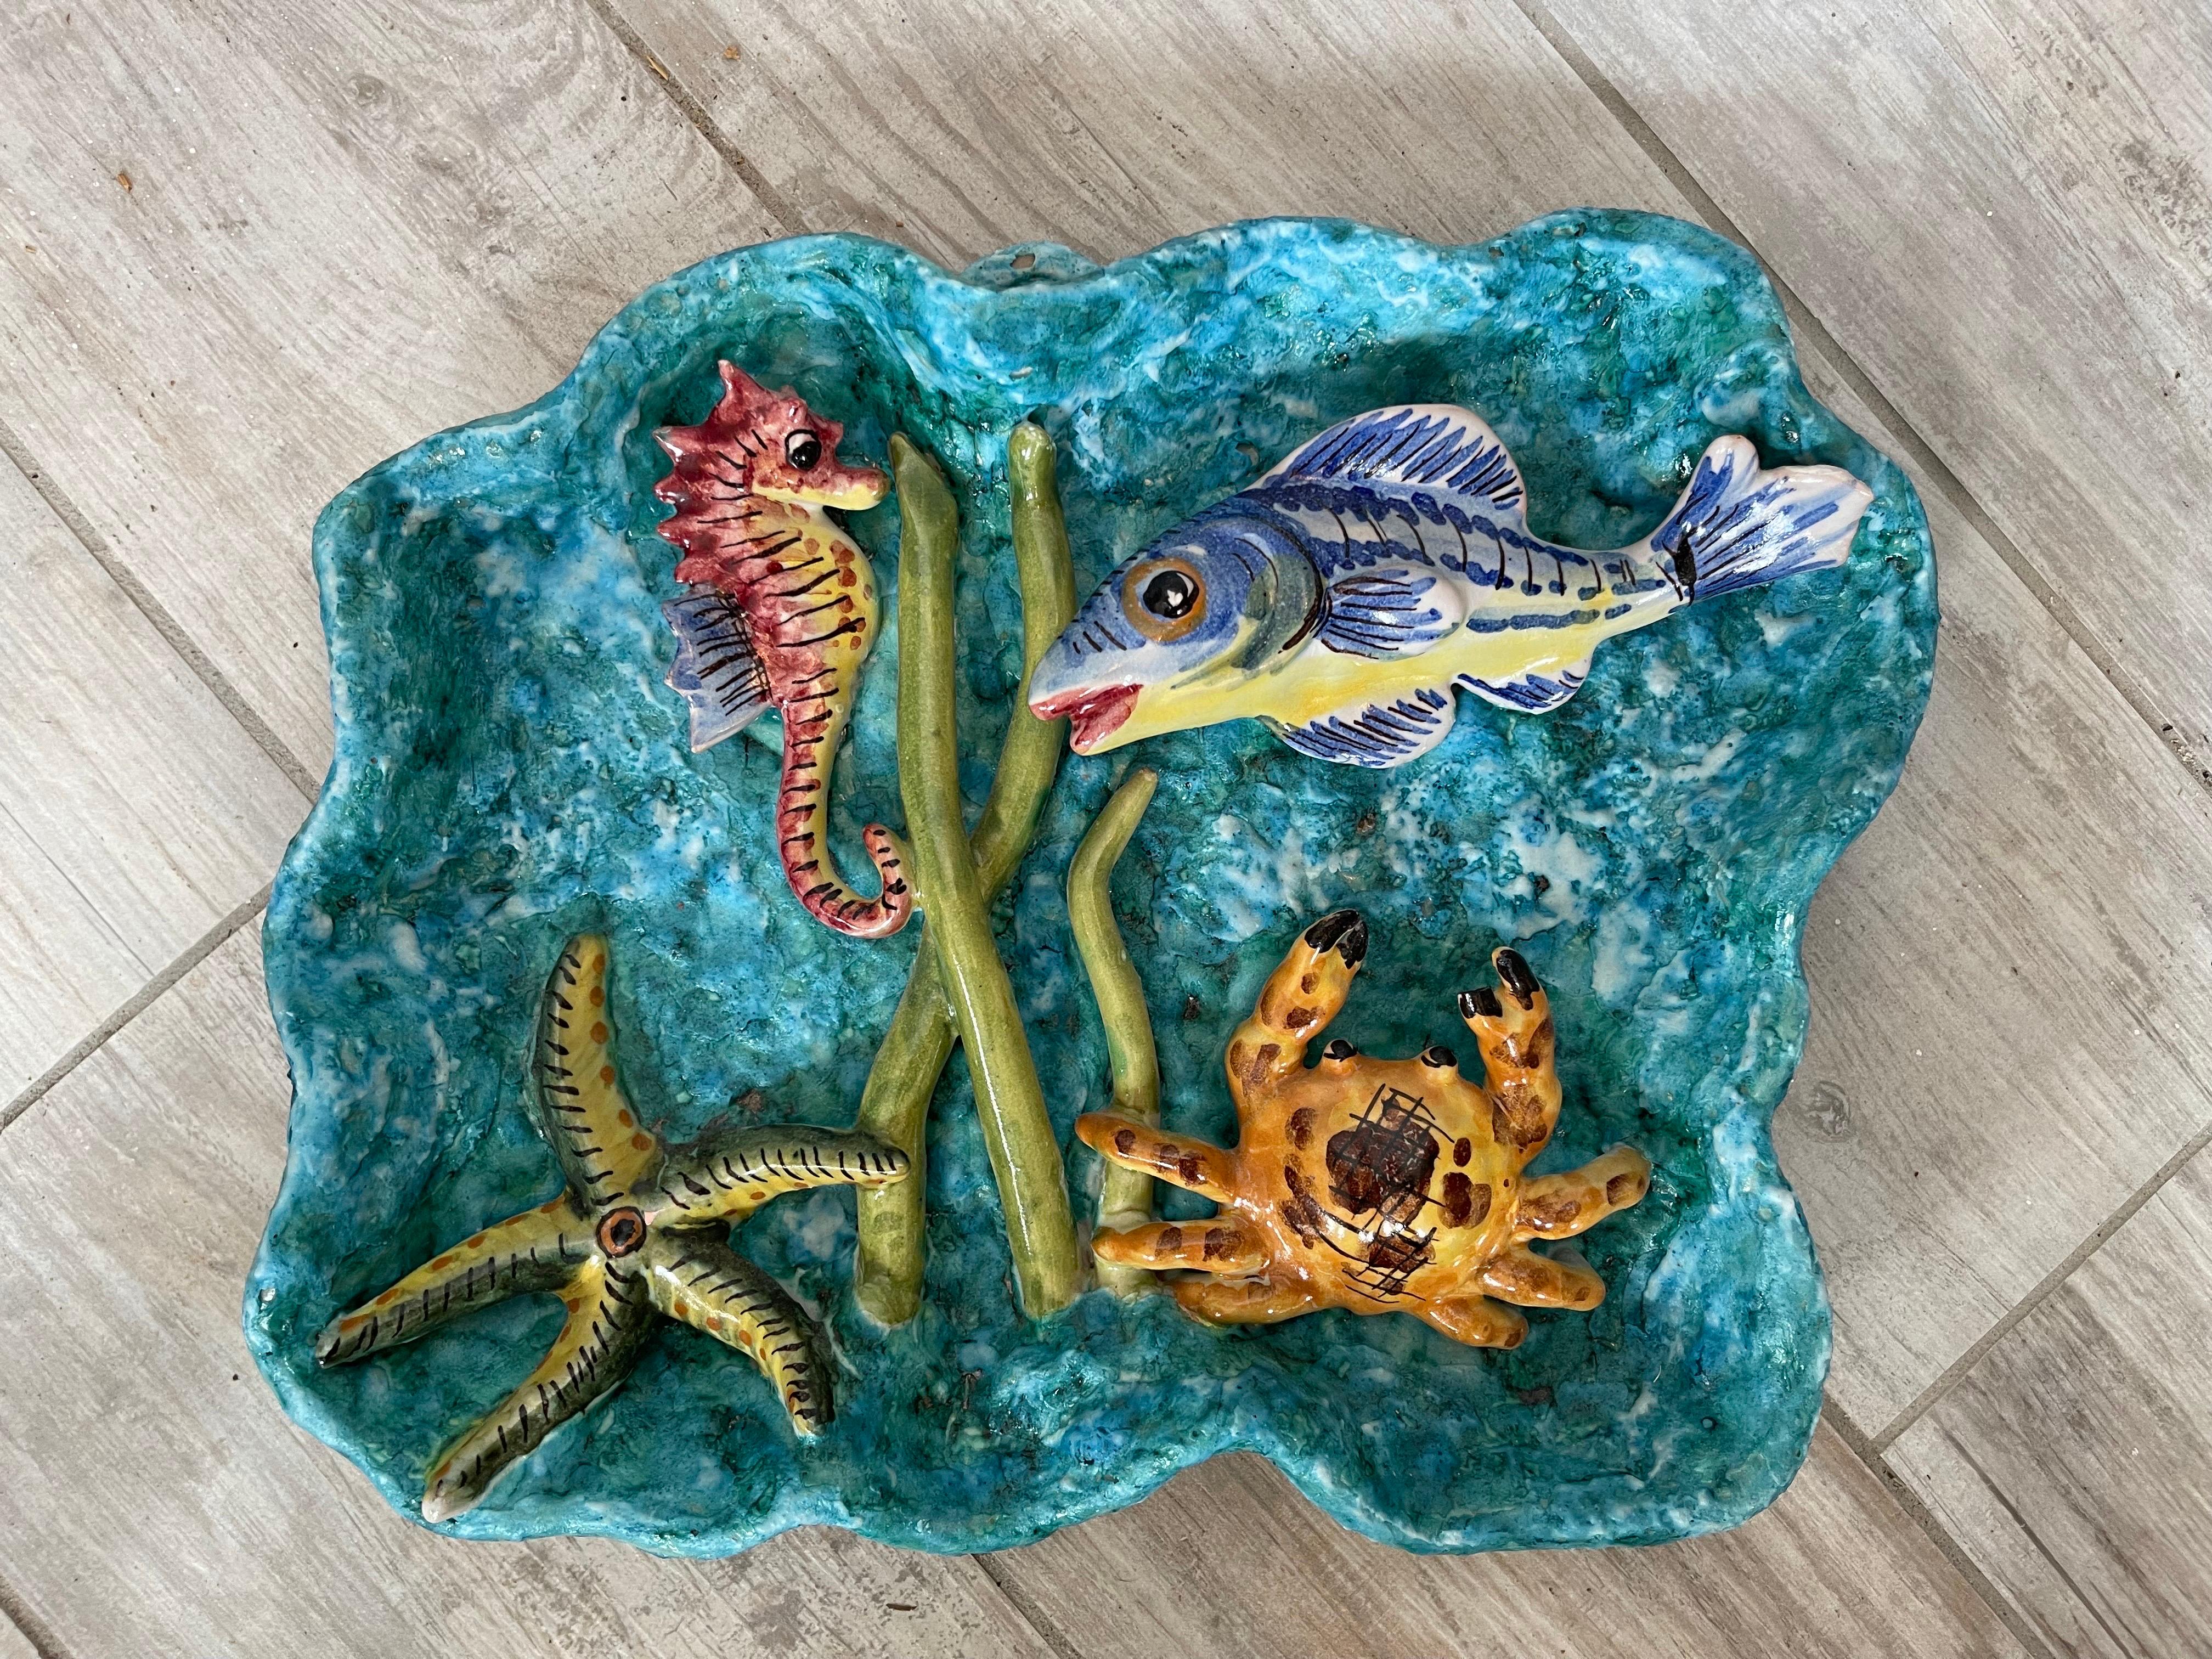 Vintage glazed terra cotta platter with three dimensional SeaLife. Very whimsical & colorful.